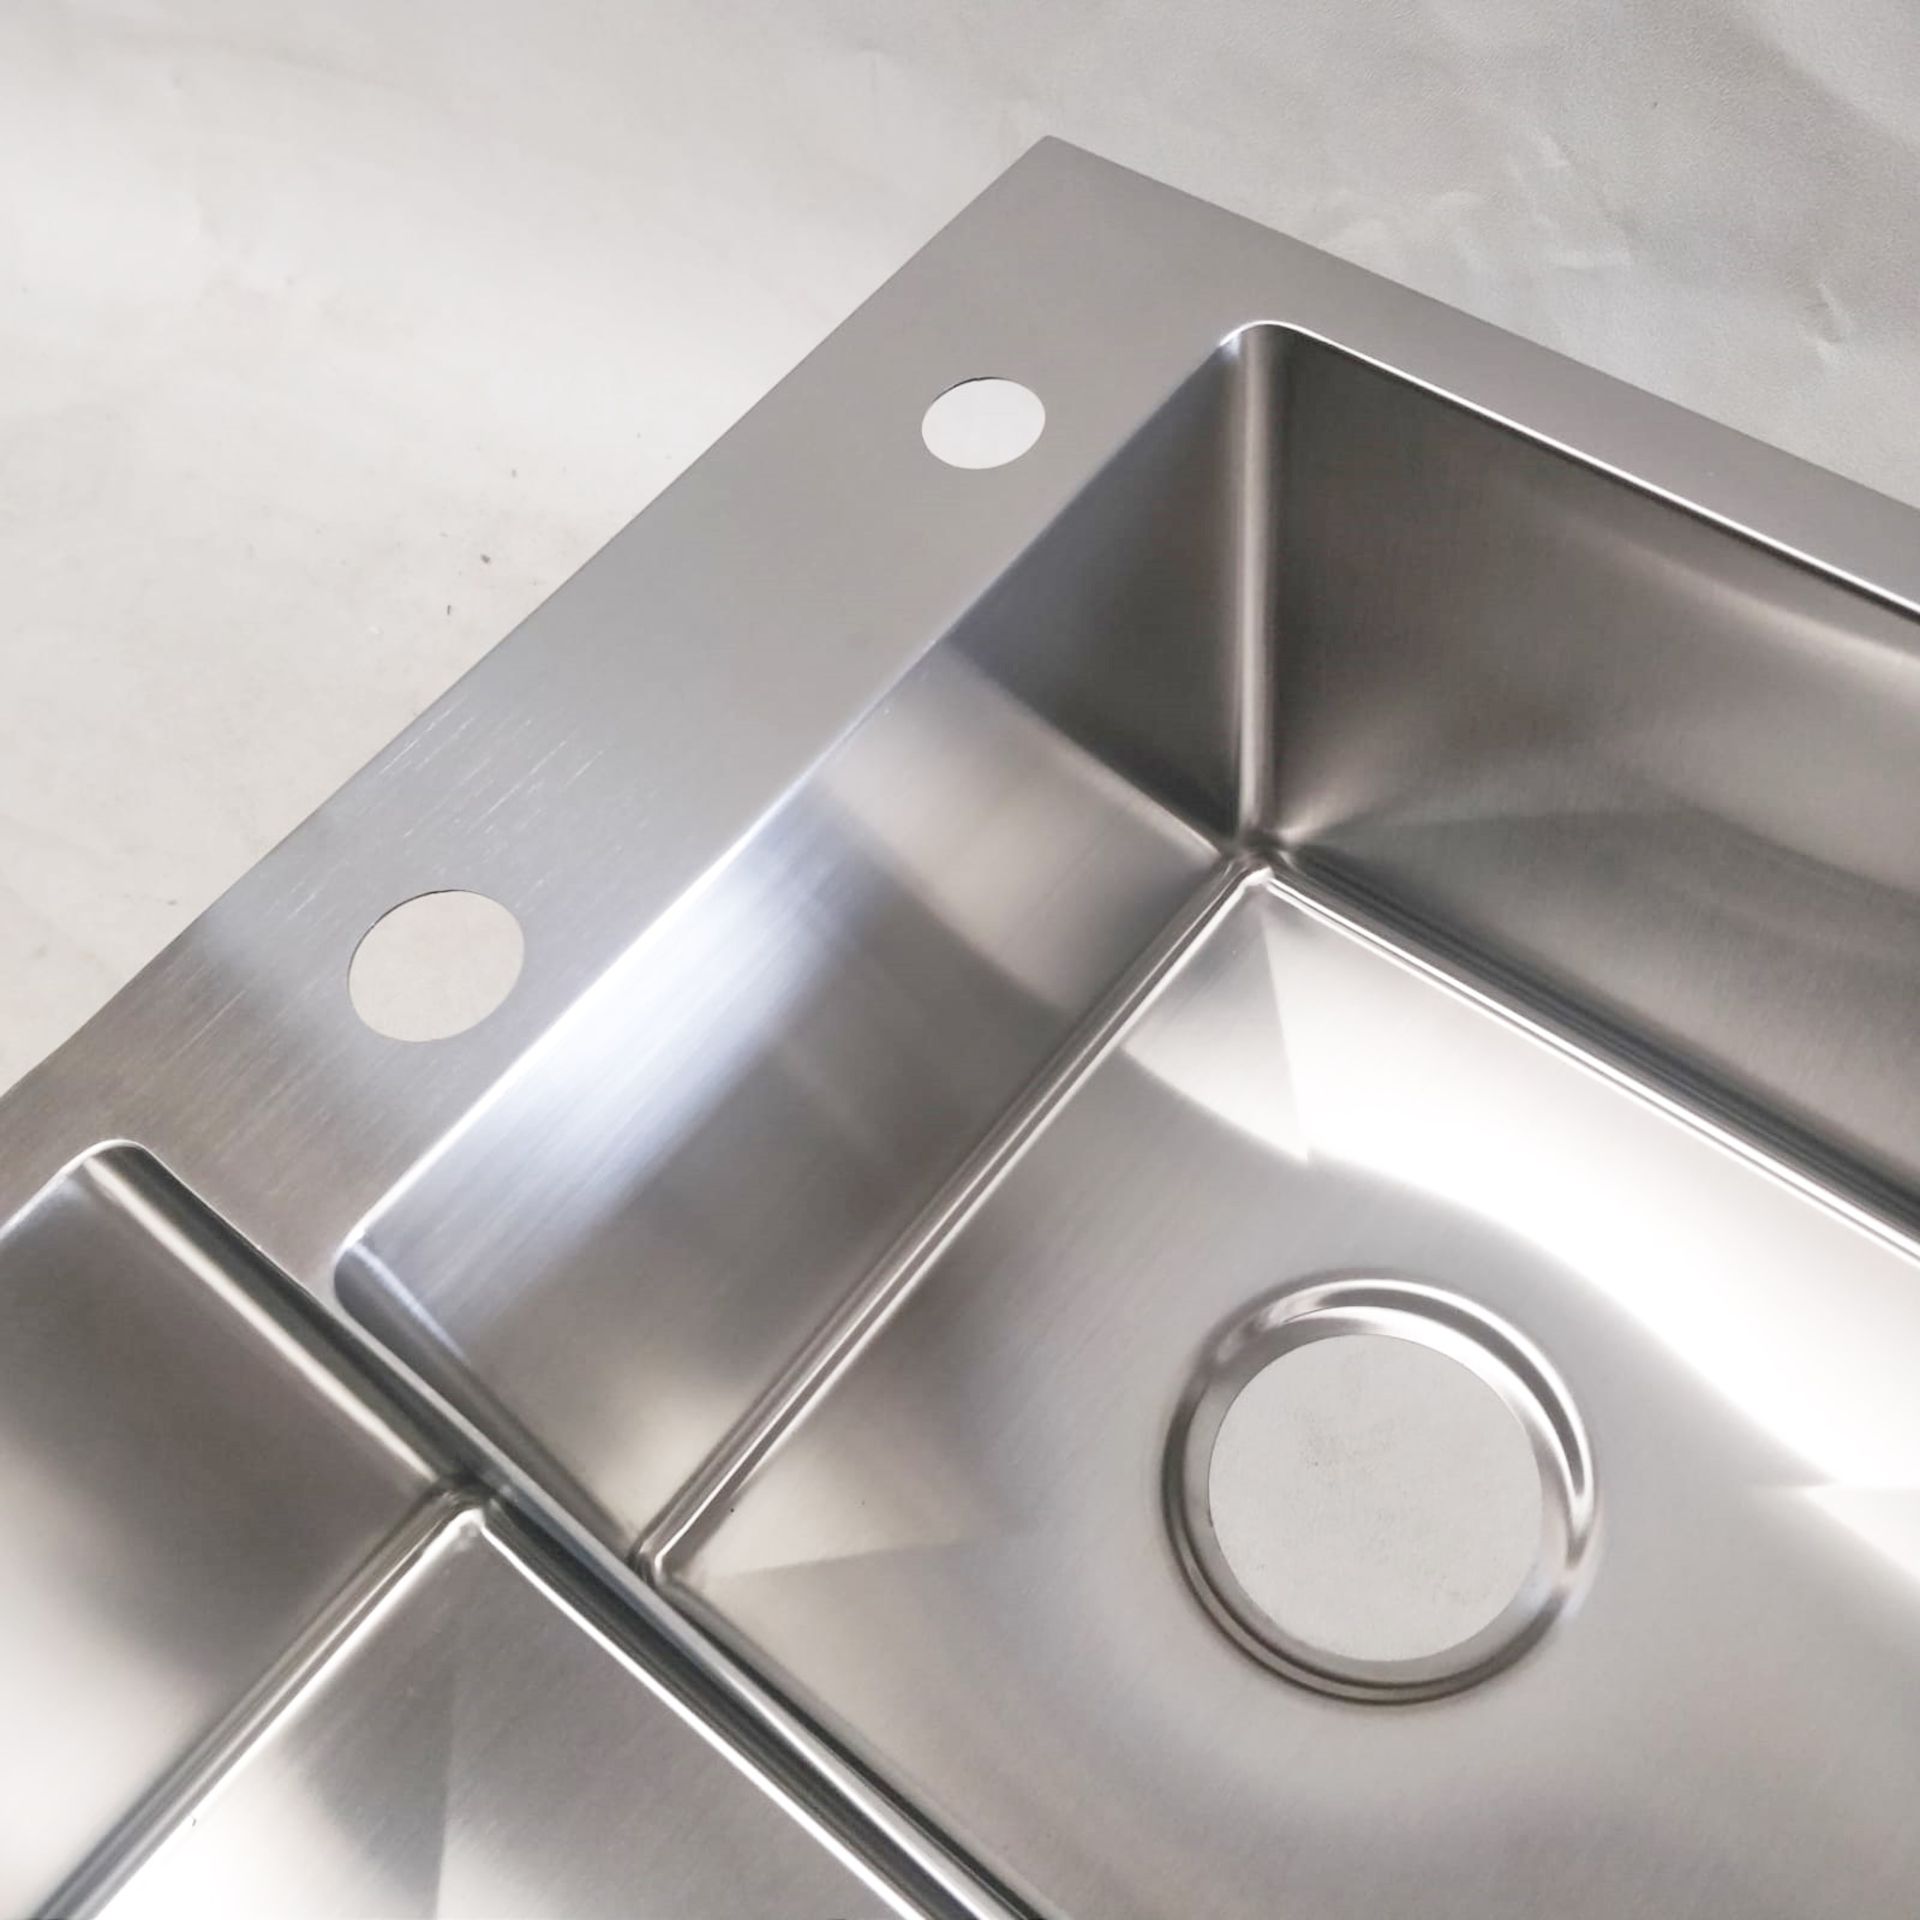 1 x Twin Bowl Contemporary Kitchen Sink Basin - Stainless Steel Finish - Model KS0059 - Includes - Image 9 of 16